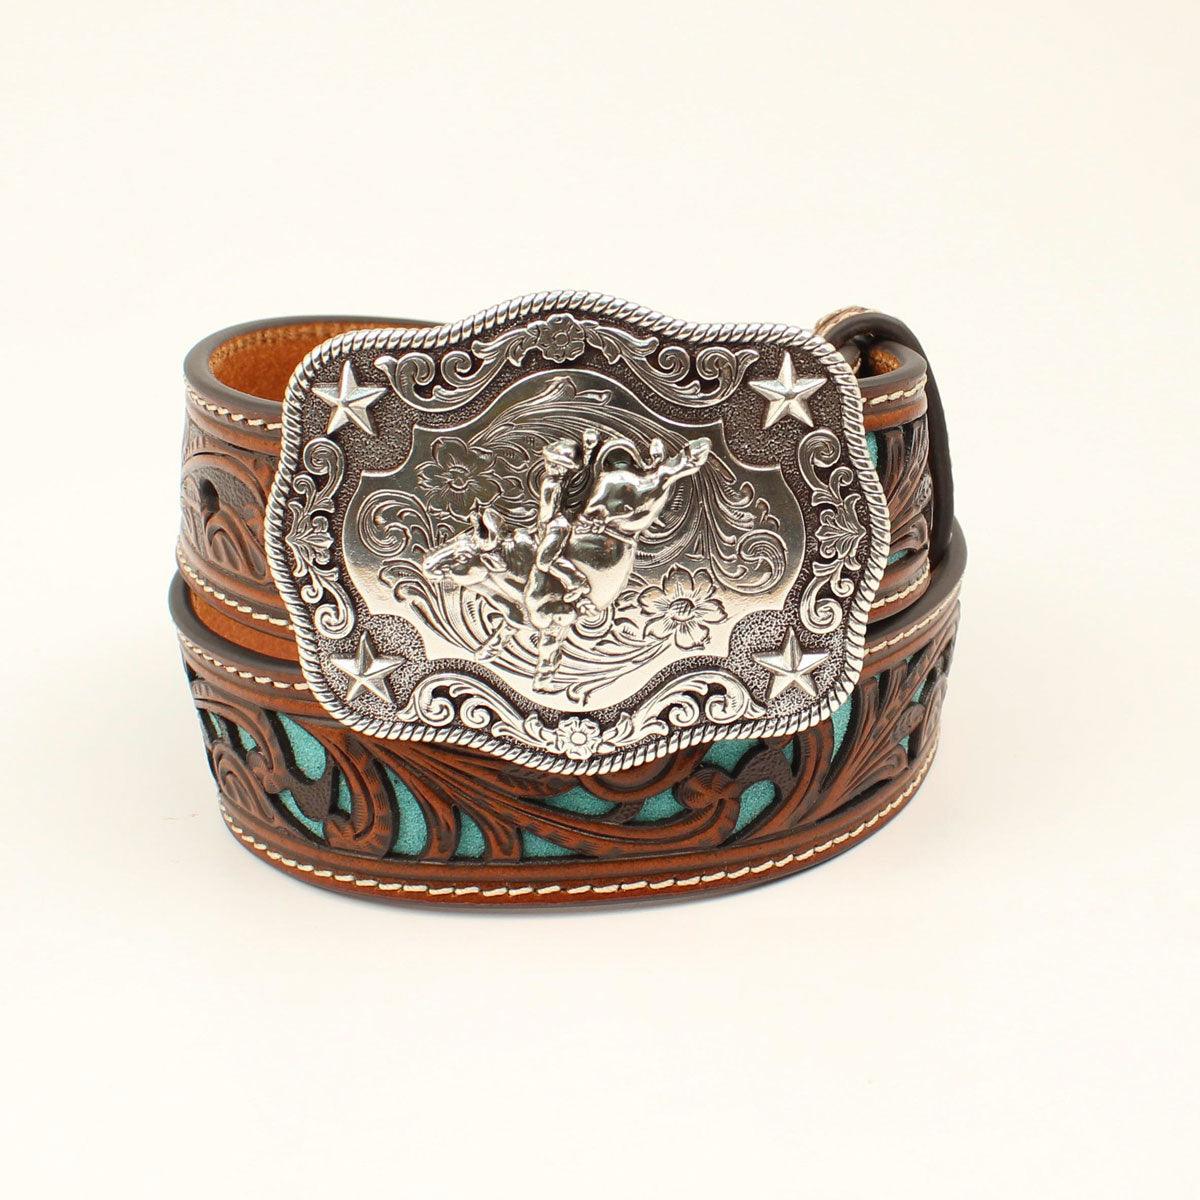 Nocona Ladies Western Belt with a hint of turquoise